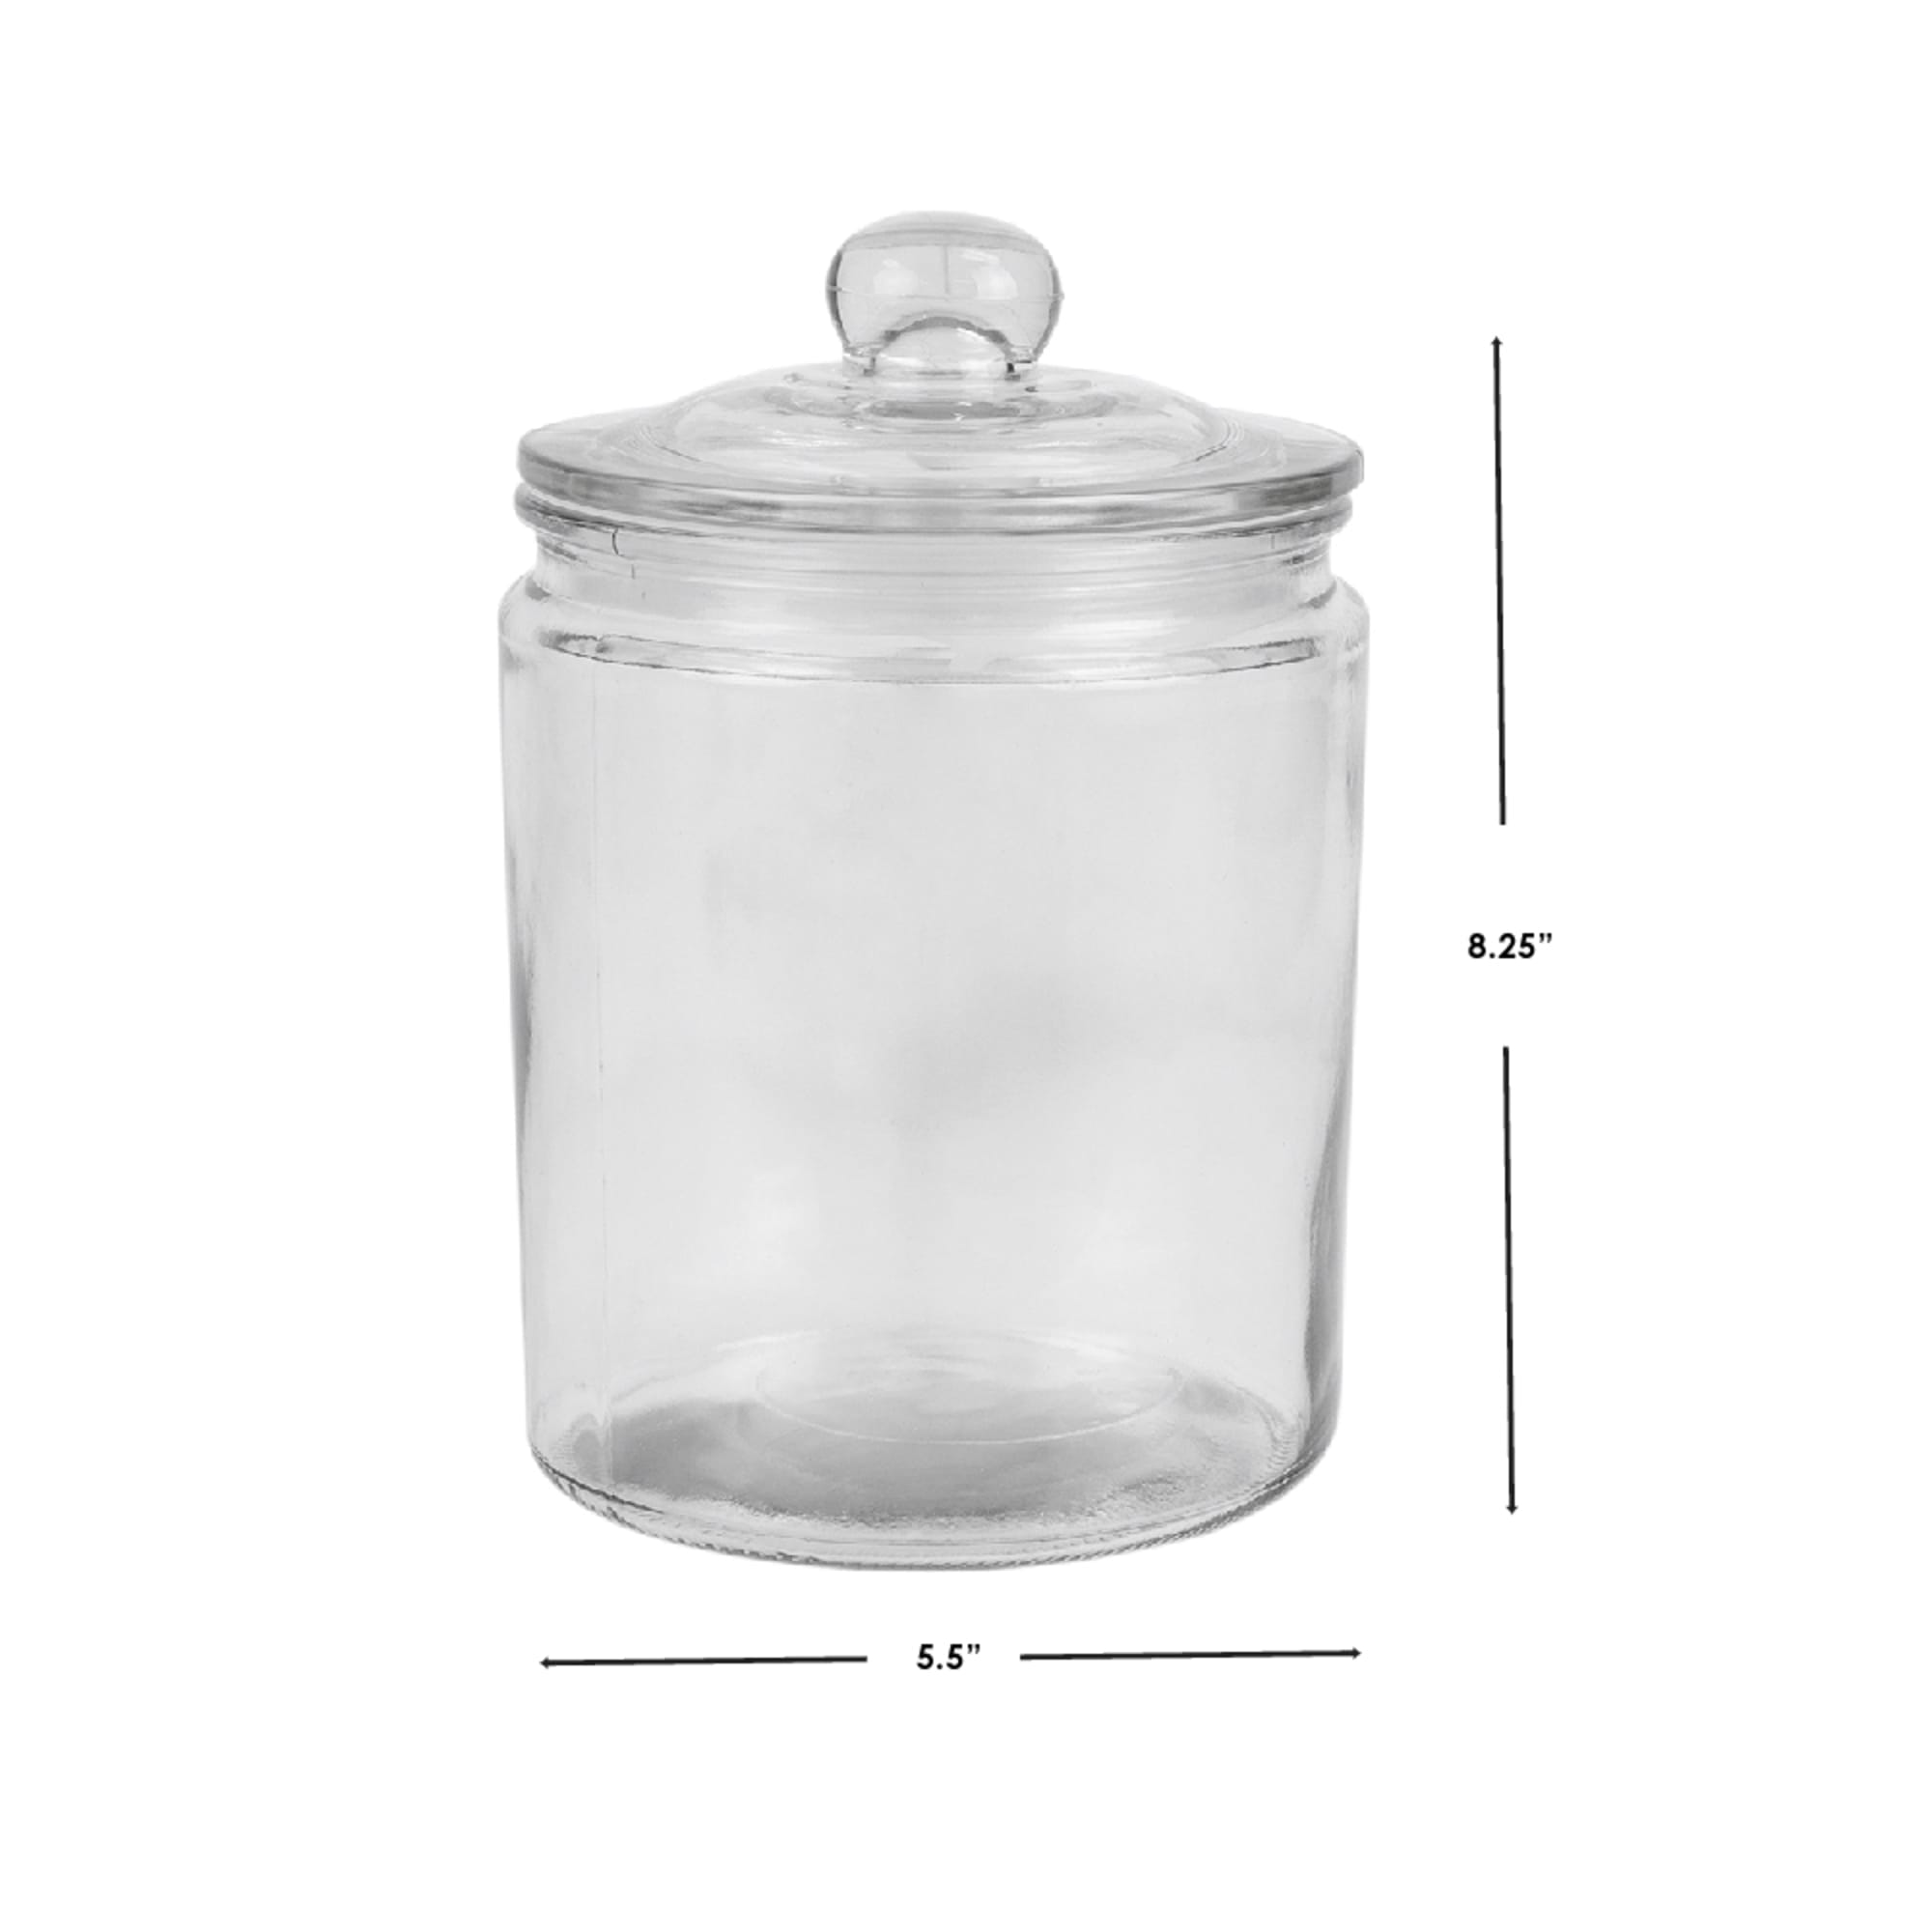 Home Basics Renaissance Collection Medium Glass Jar with Easy Grab Knob Handles, Clear $5.00 EACH, CASE PACK OF 6